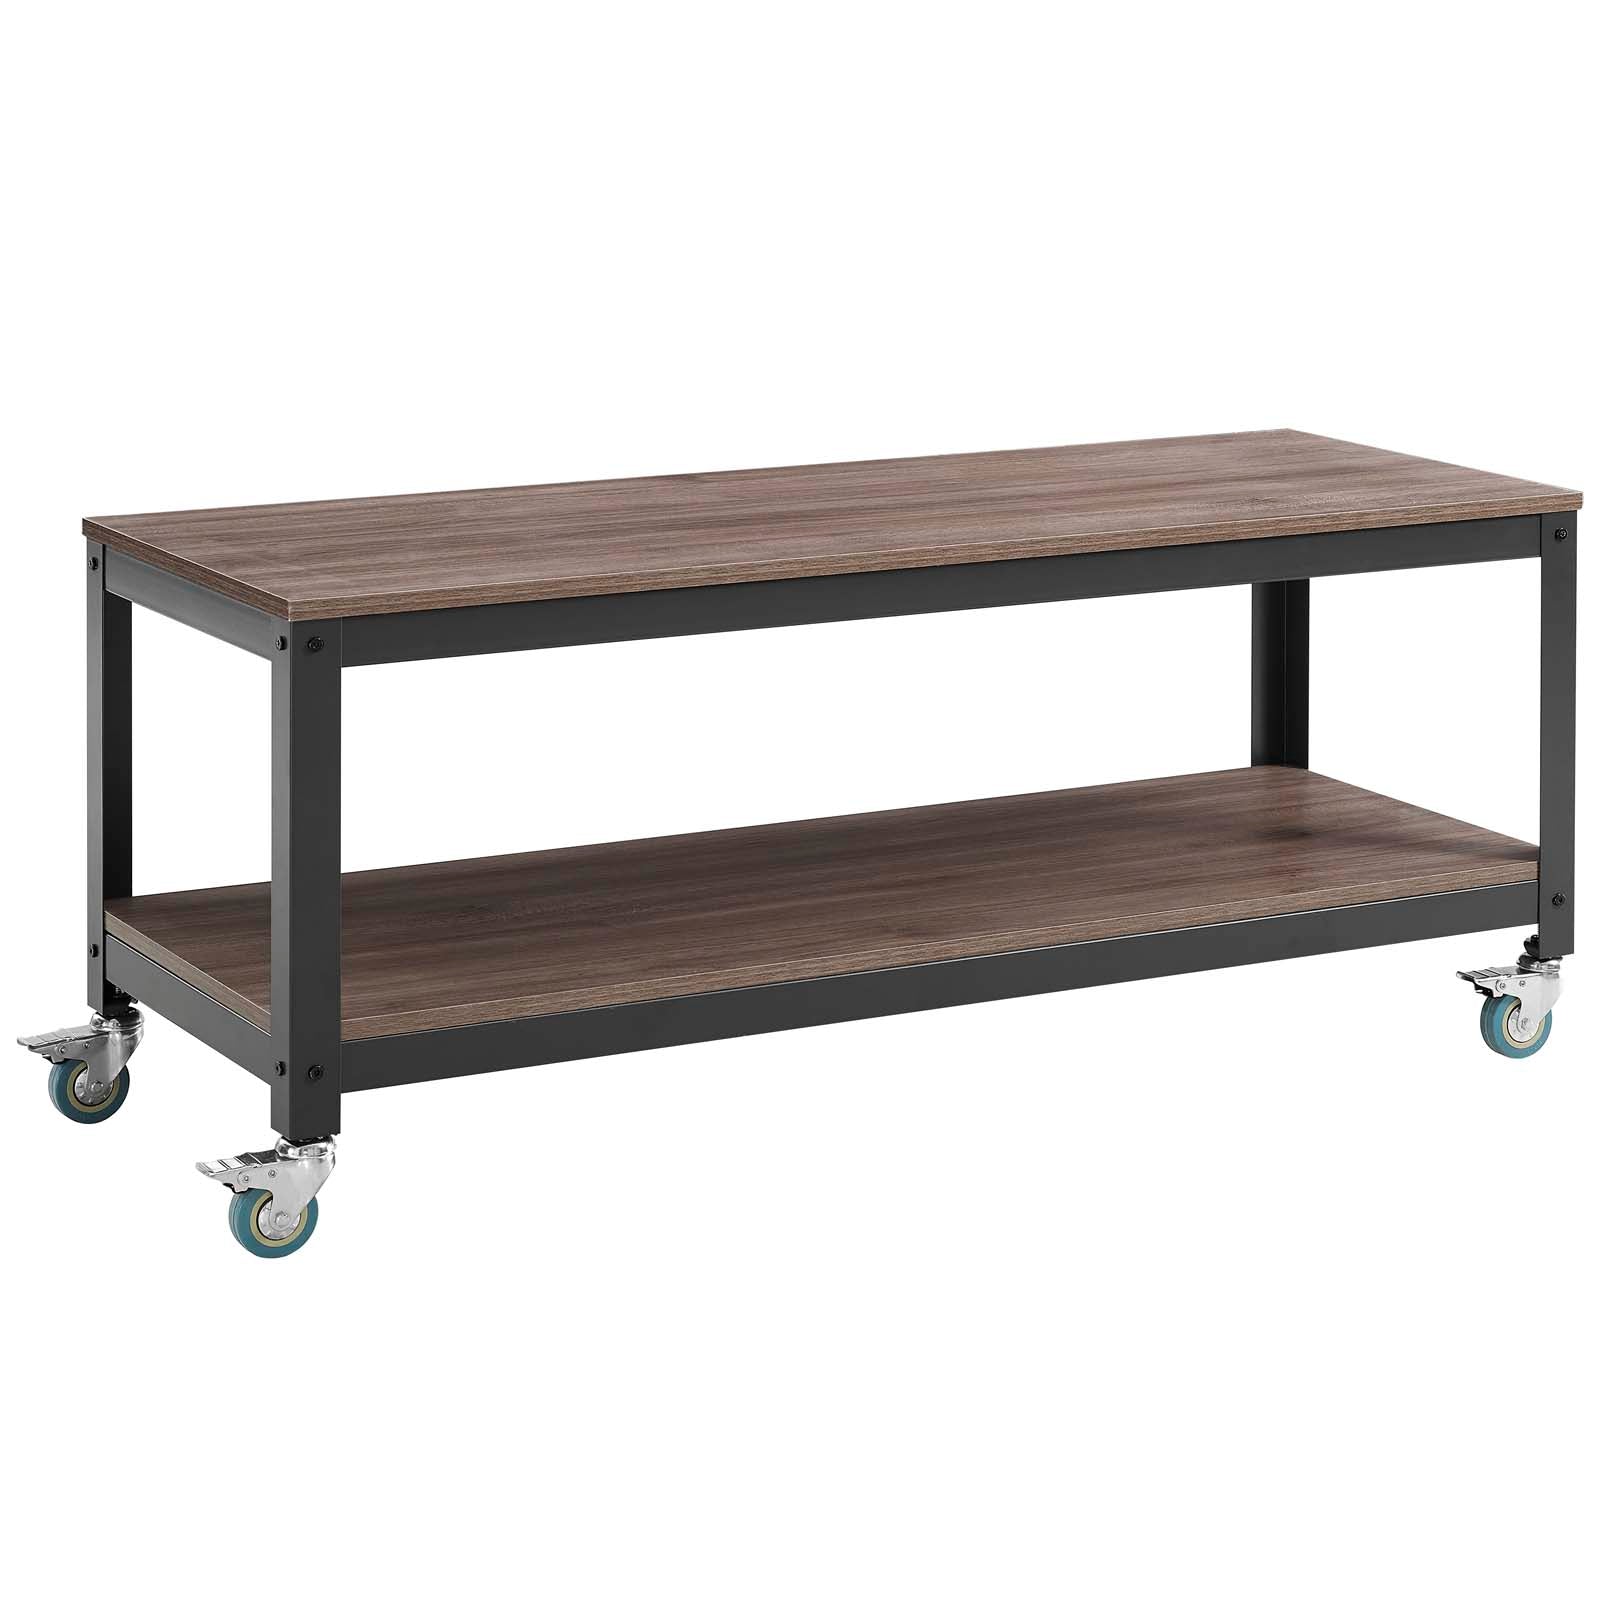 Vivify Tiered Serving or TV Stand - East Shore Modern Home Furnishings